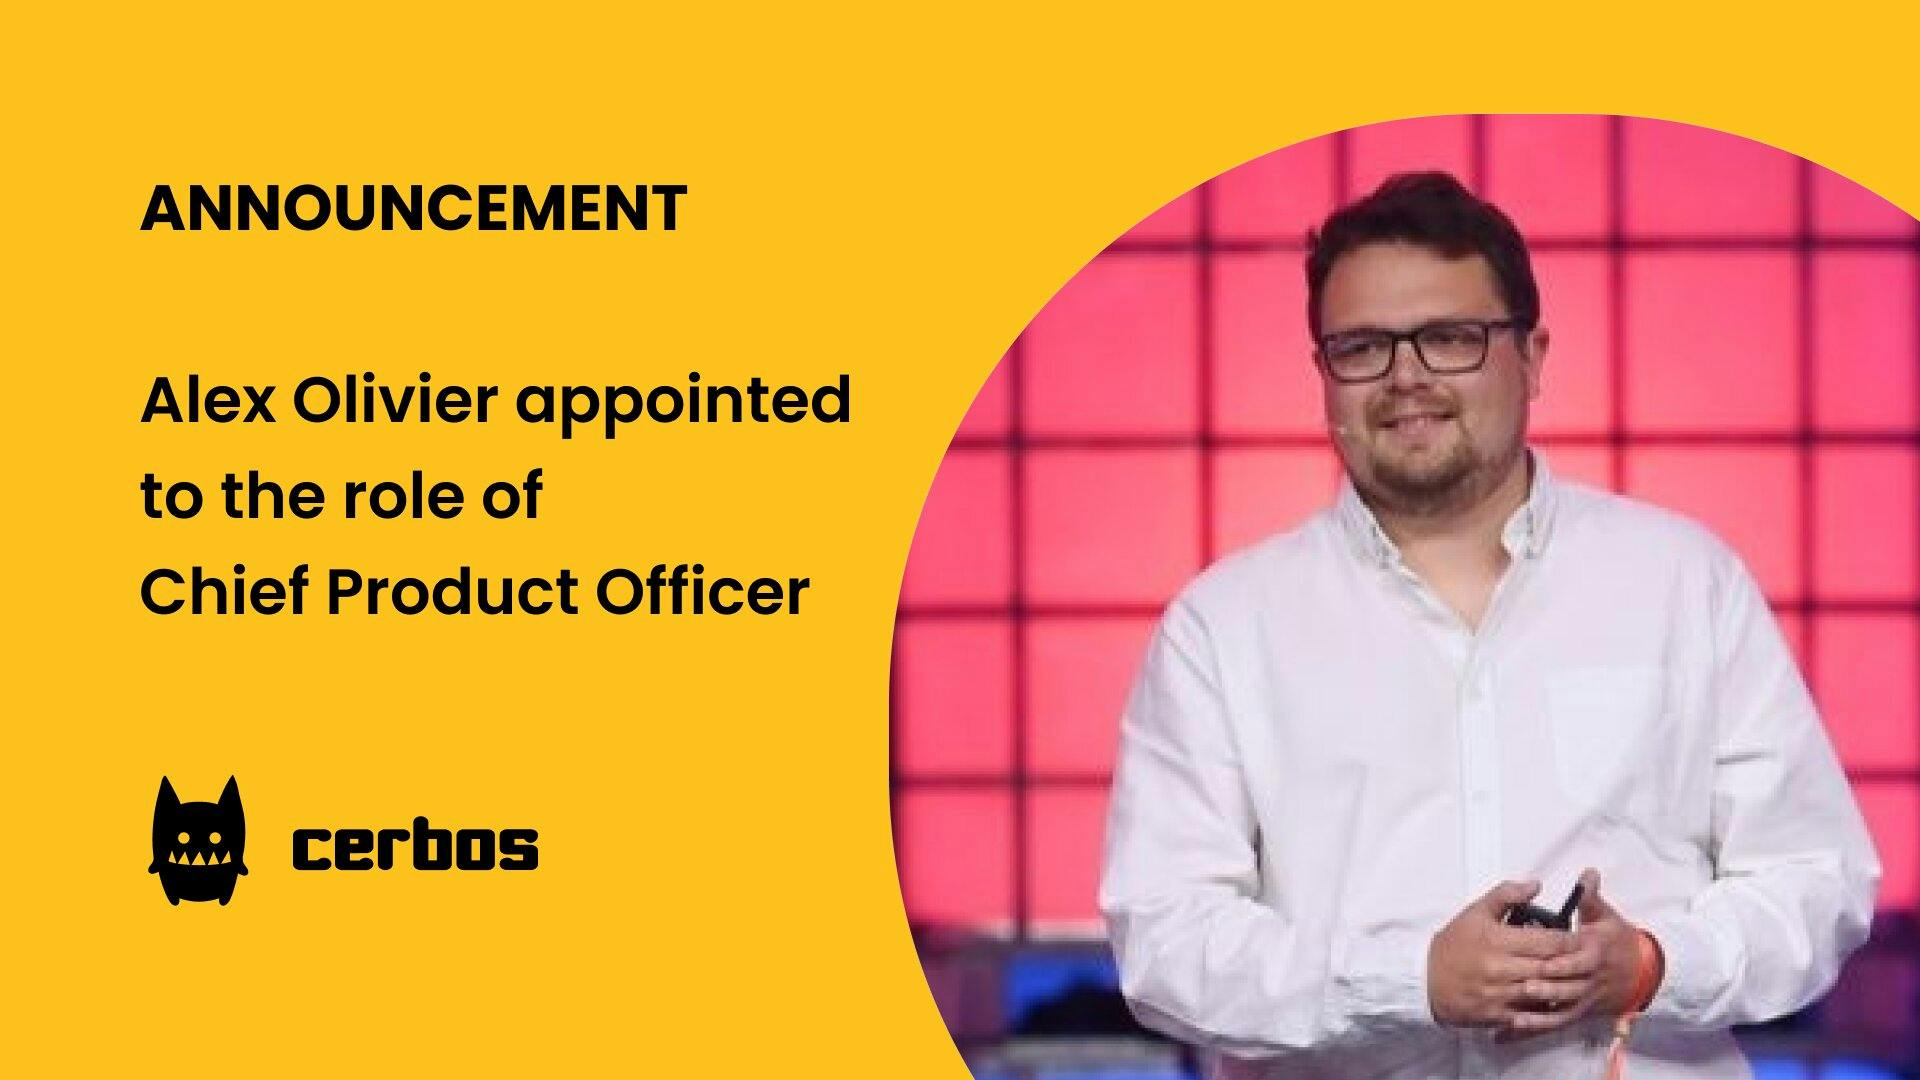 Cerbos appoints Alex Olivier to the role of Chief Product Officer